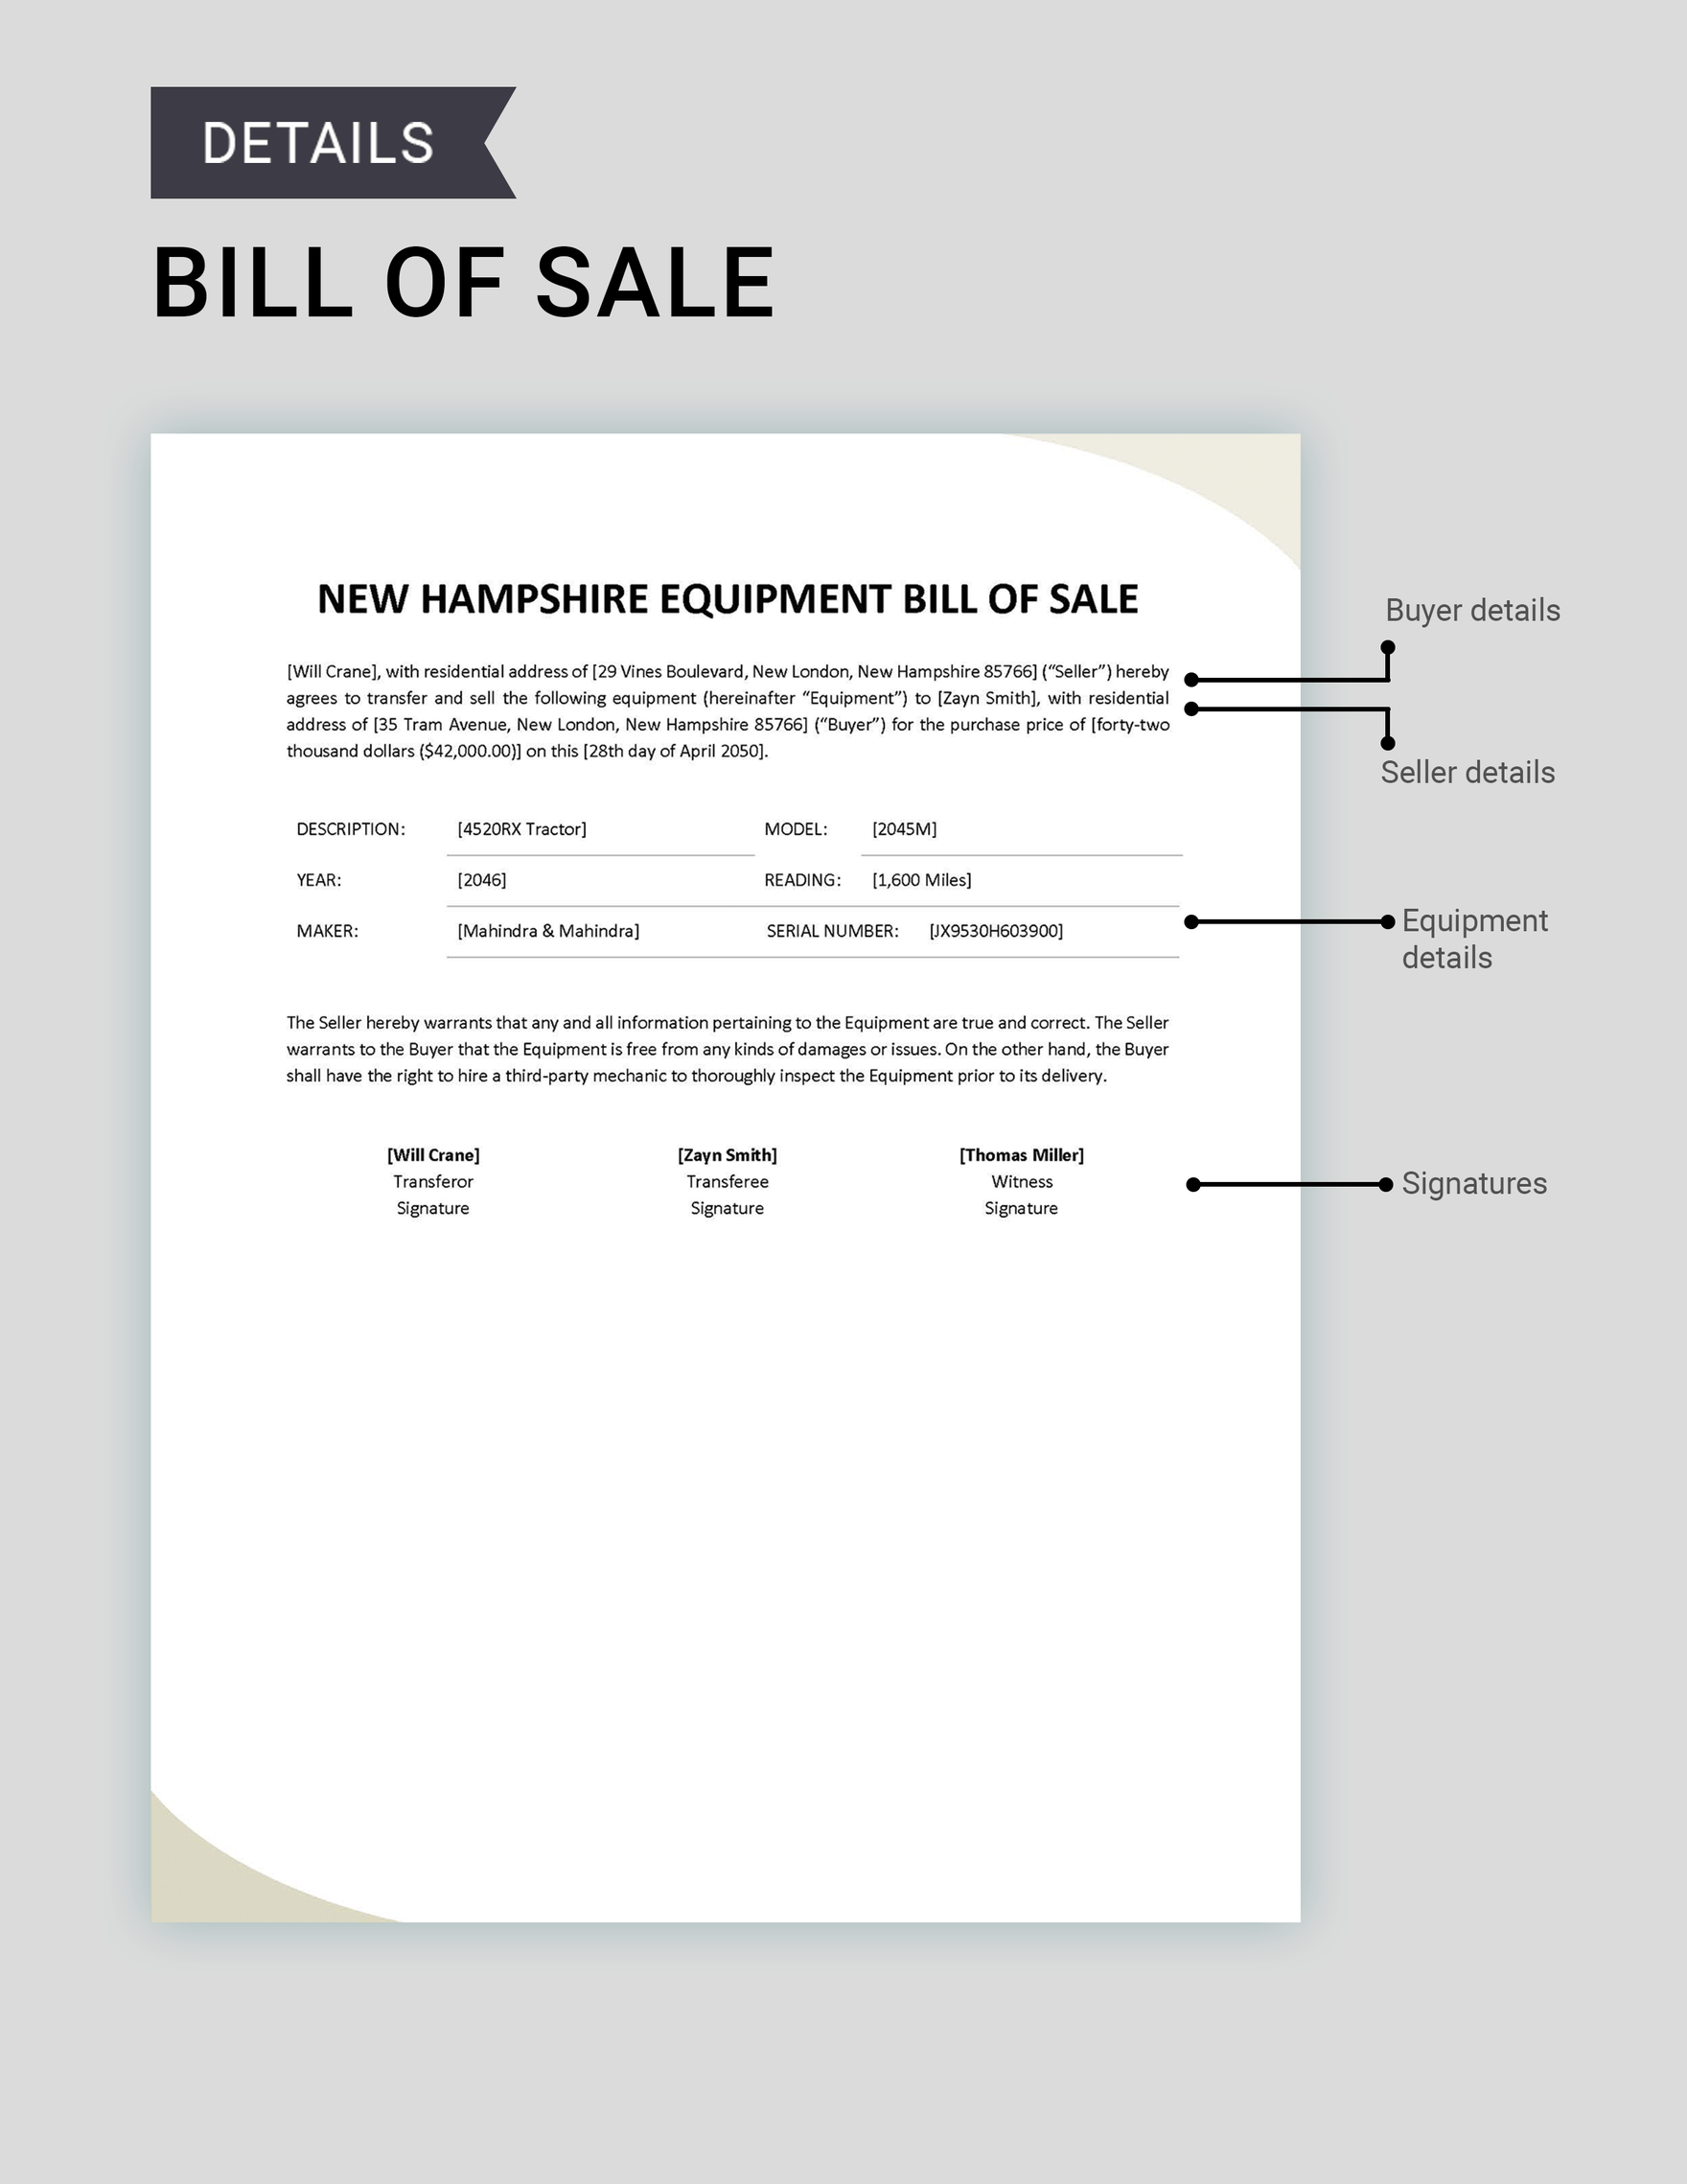 New Hampshire Equipment Bill of Sale Template